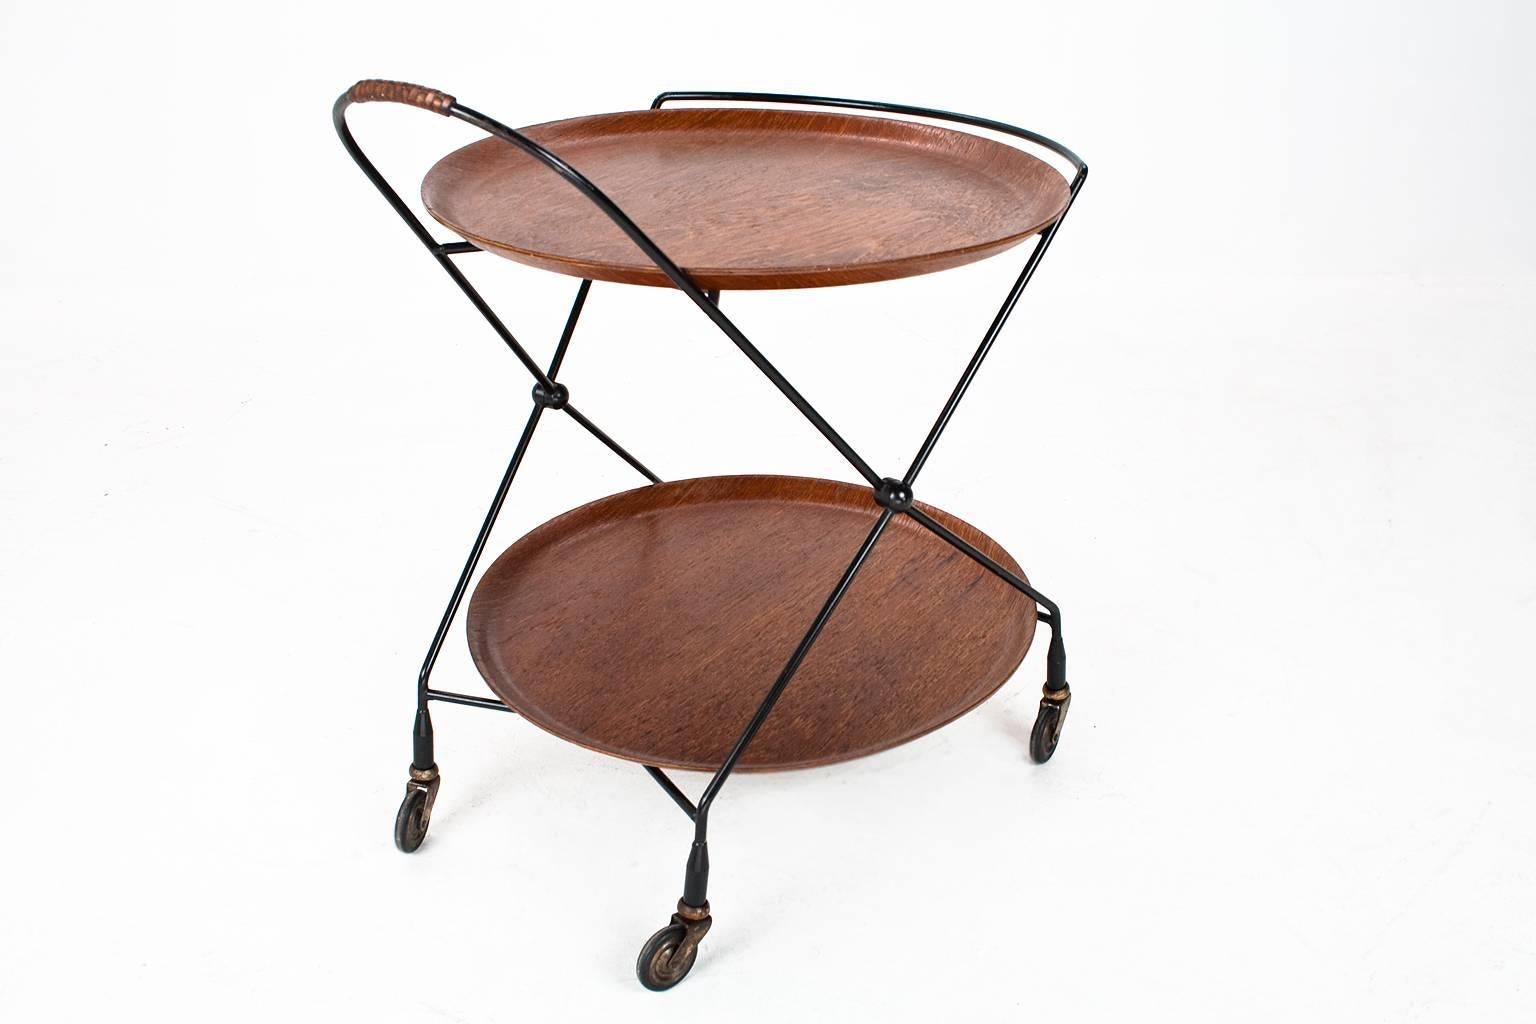 Beautiful Swedish Mid-Century Modern serving table, trolley with two teak wooden serving trays on a black lacquered metal frame with four rotatable wheels. 

The trolley is foldable as shown on last photo. This piece considering the age in